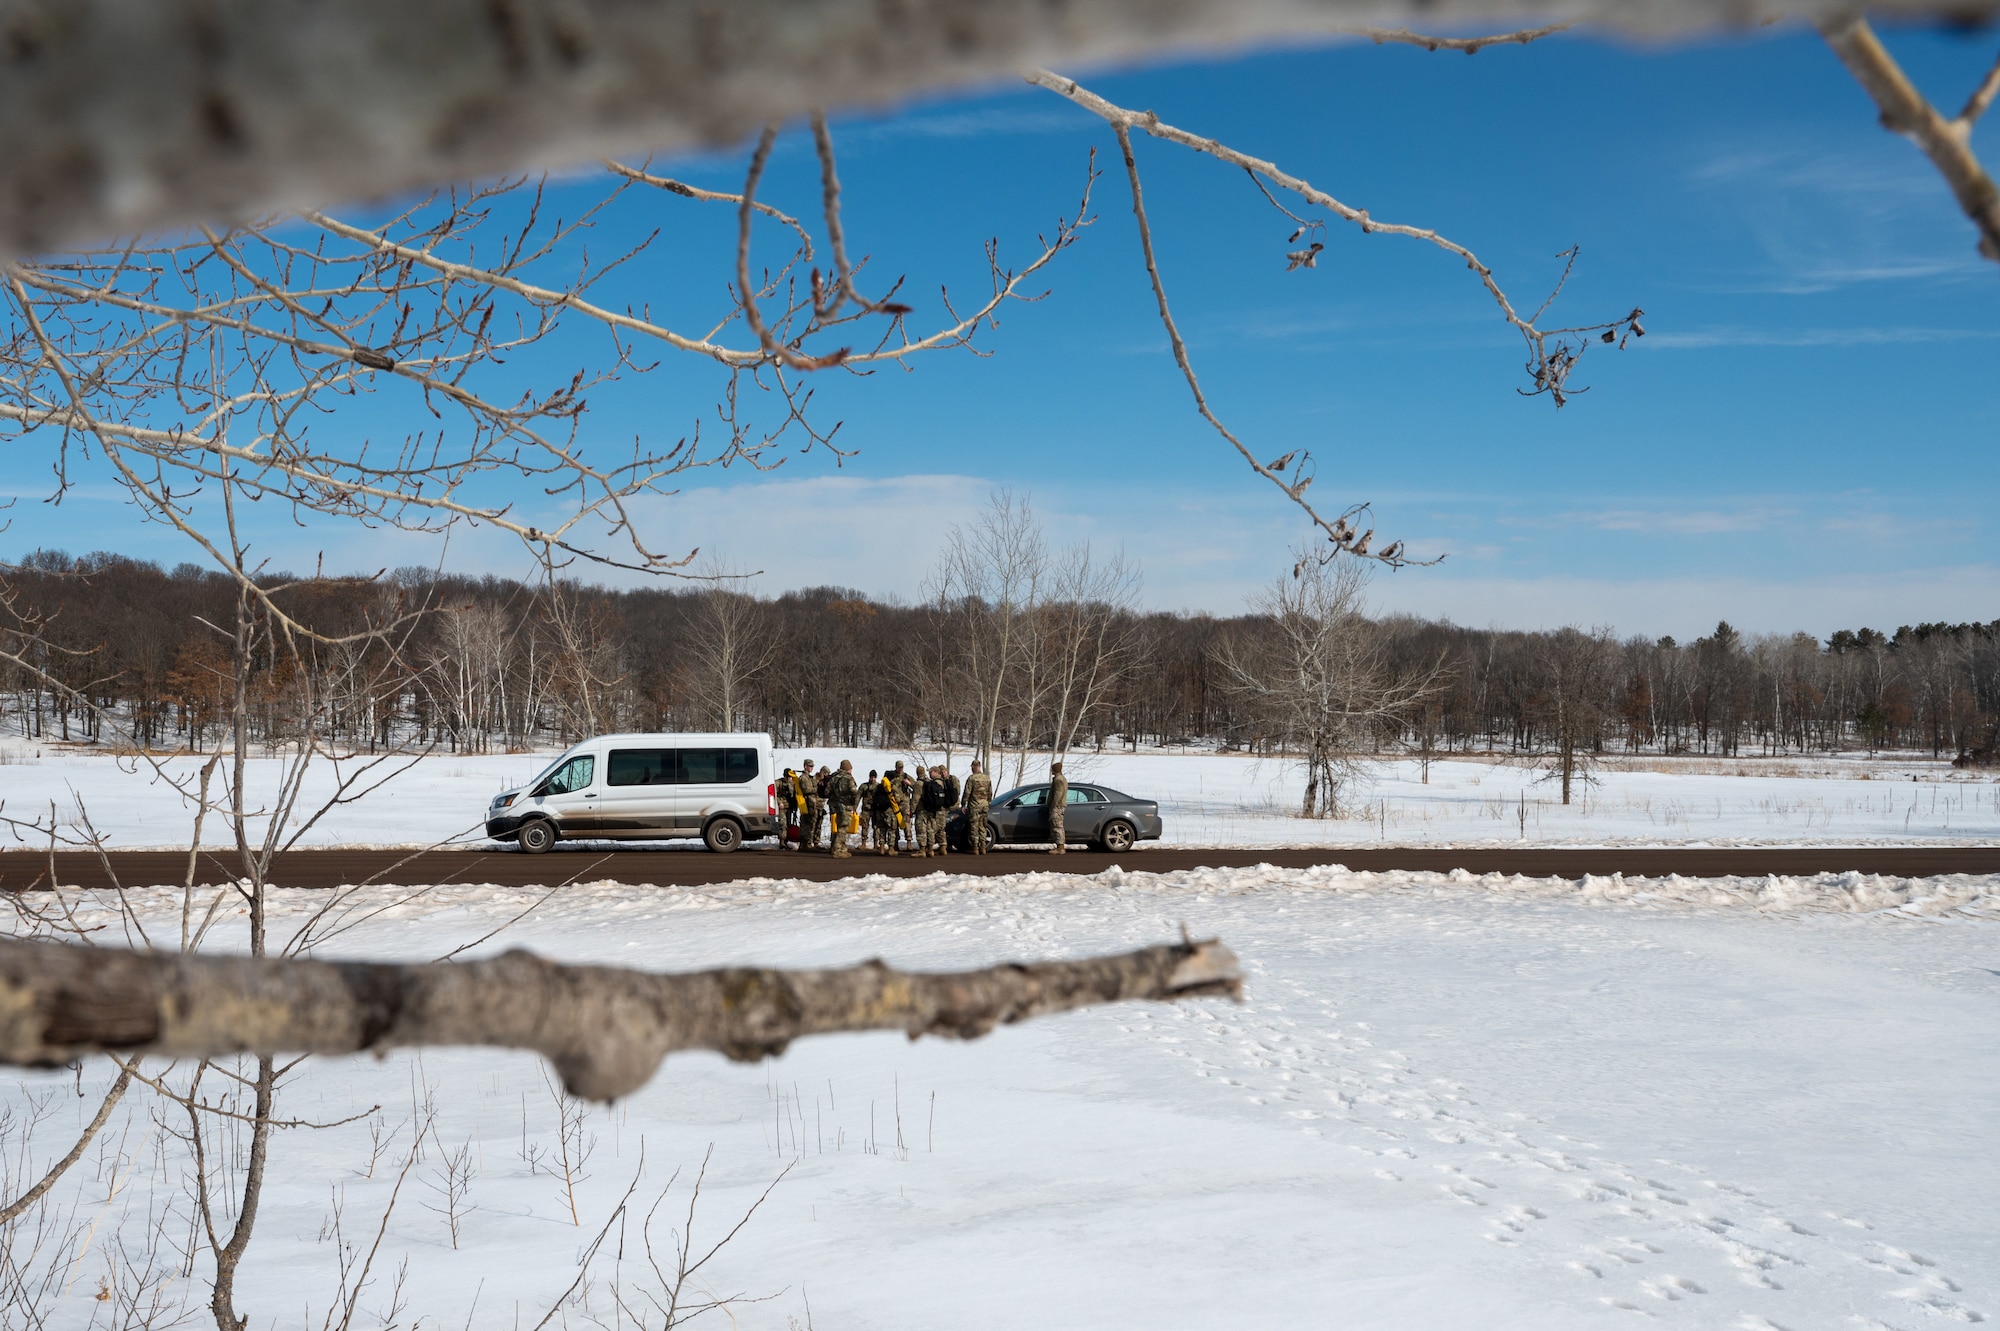 934th Civil Engineering Squadron Airmen huddle on the road at Camp Ripley, Minnesota, on April 2, 2023. The 934 CES conducted a field training exercise, including land navigation and general tent setup. (U.S. Air Force photo by Senior Airman Matthew Reisdorf)